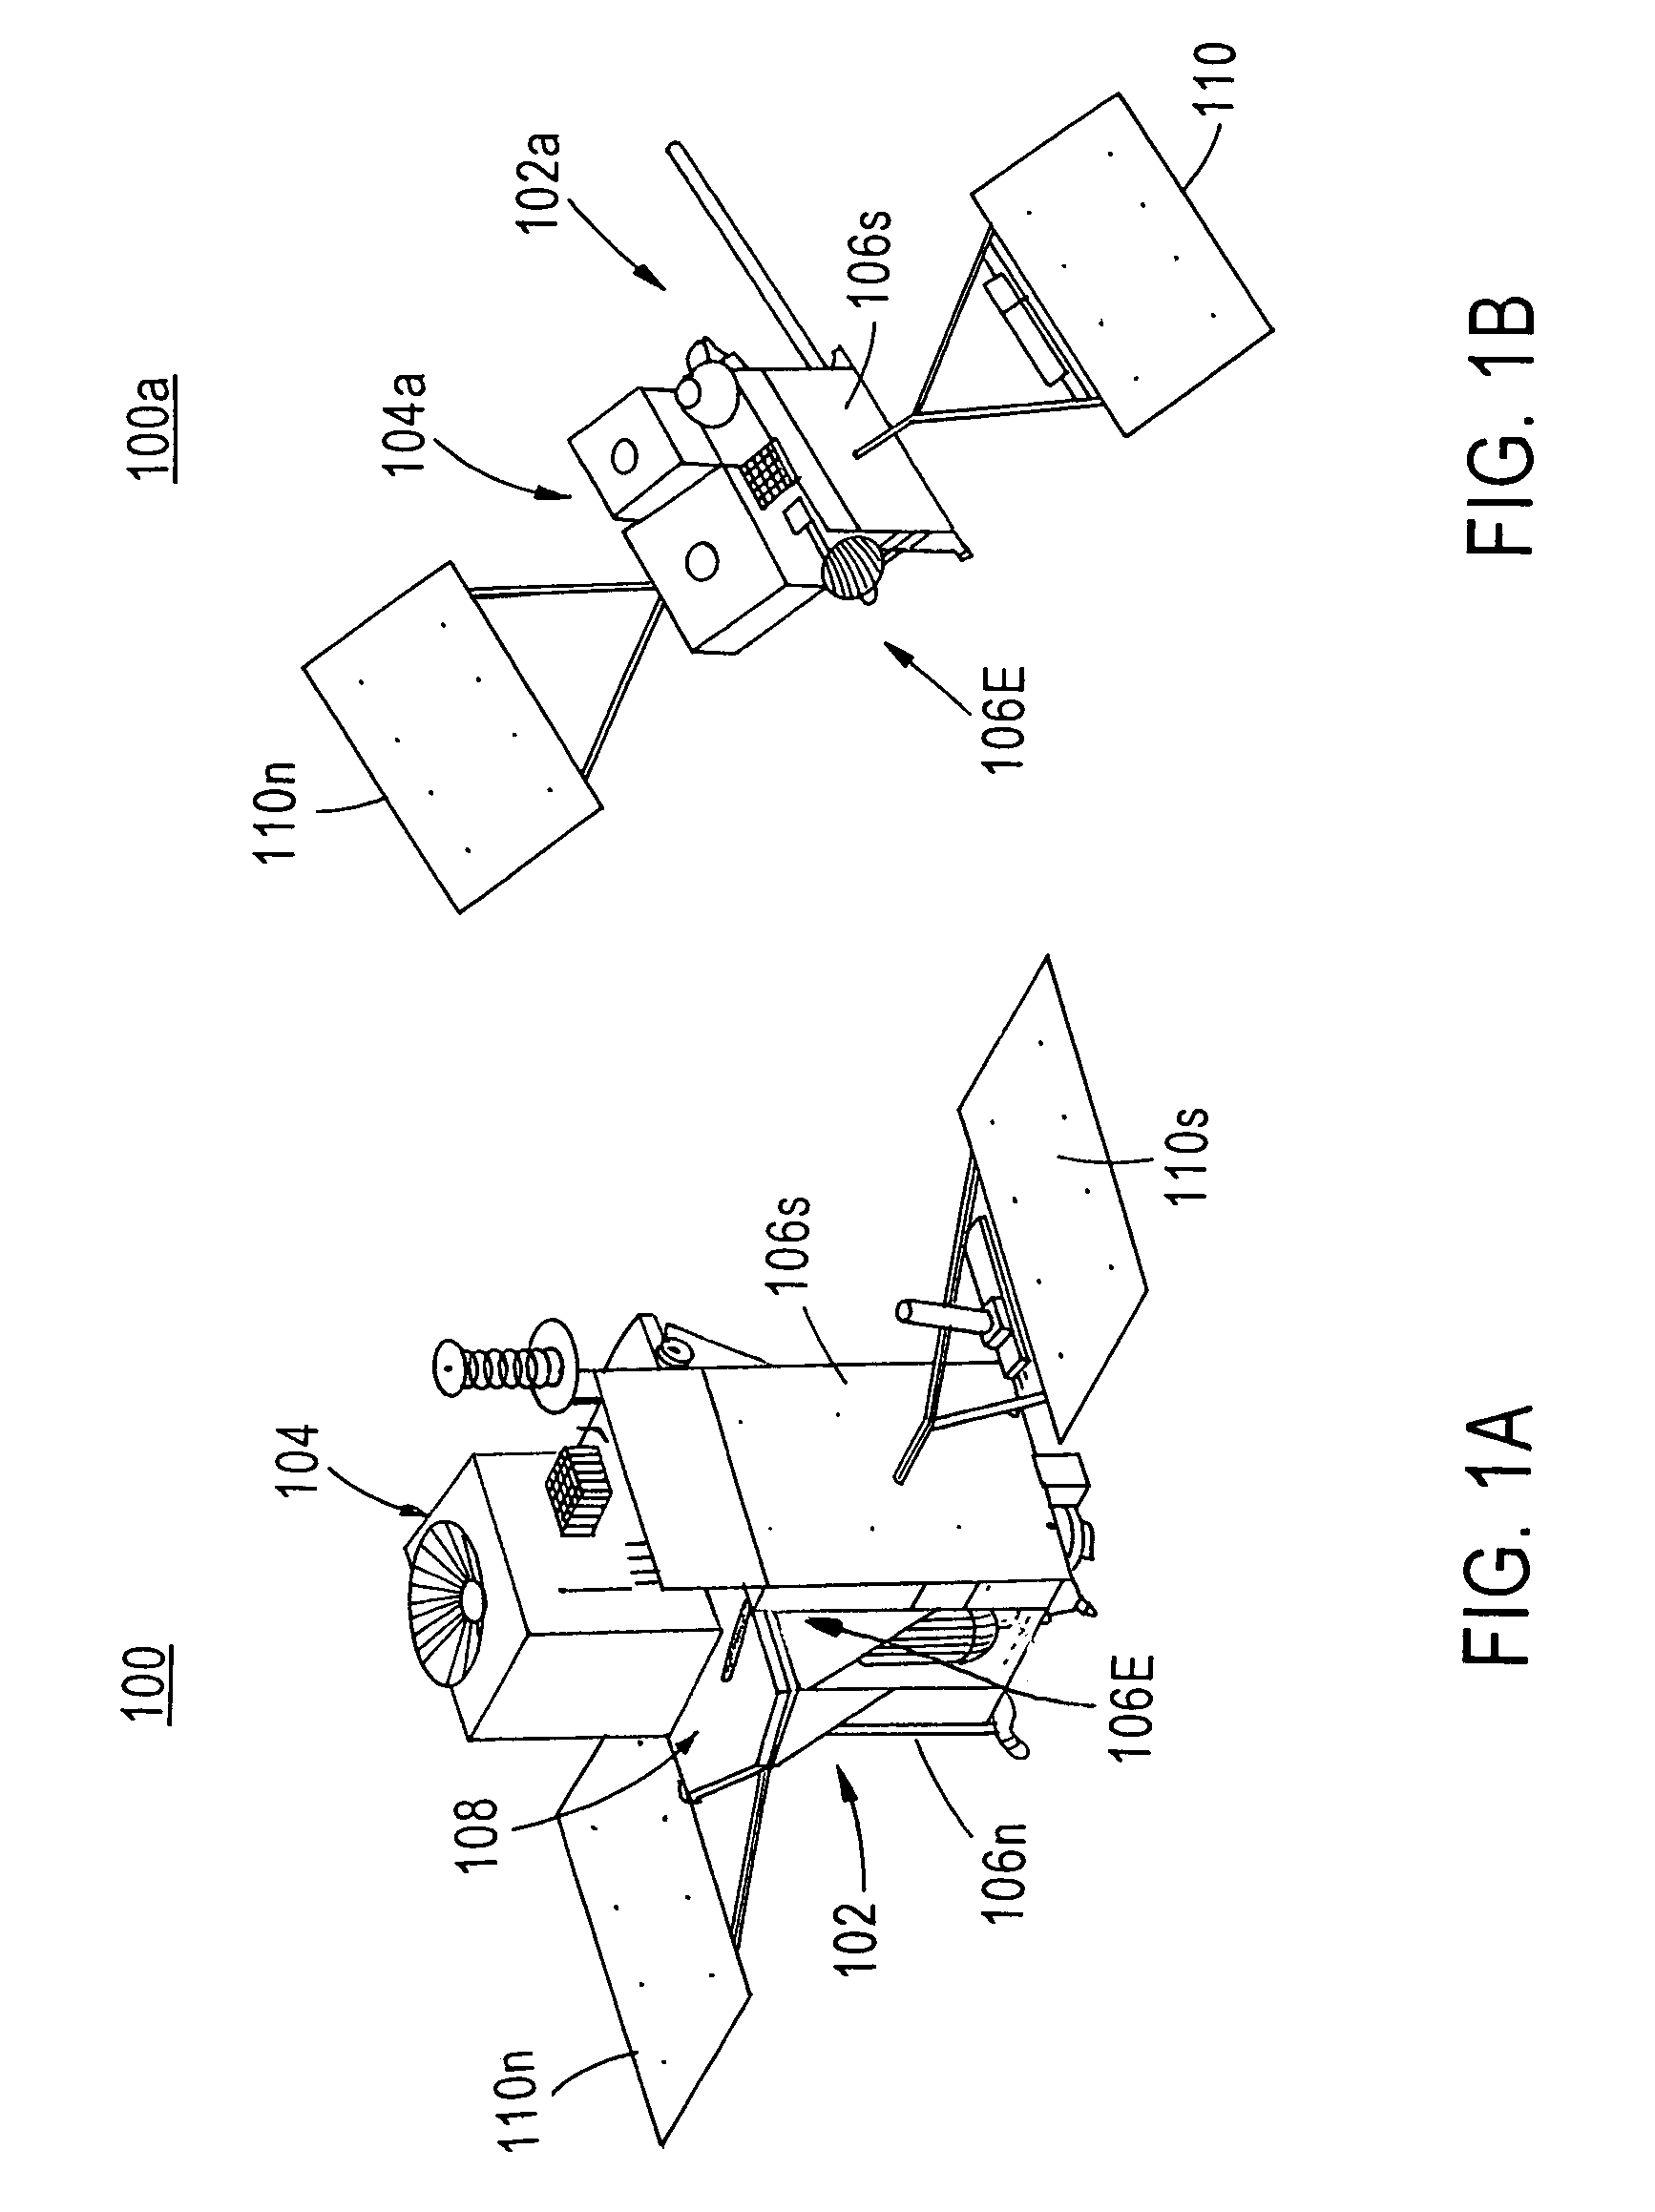 Scalable thermal control system for spacecraft mounted instrumentation